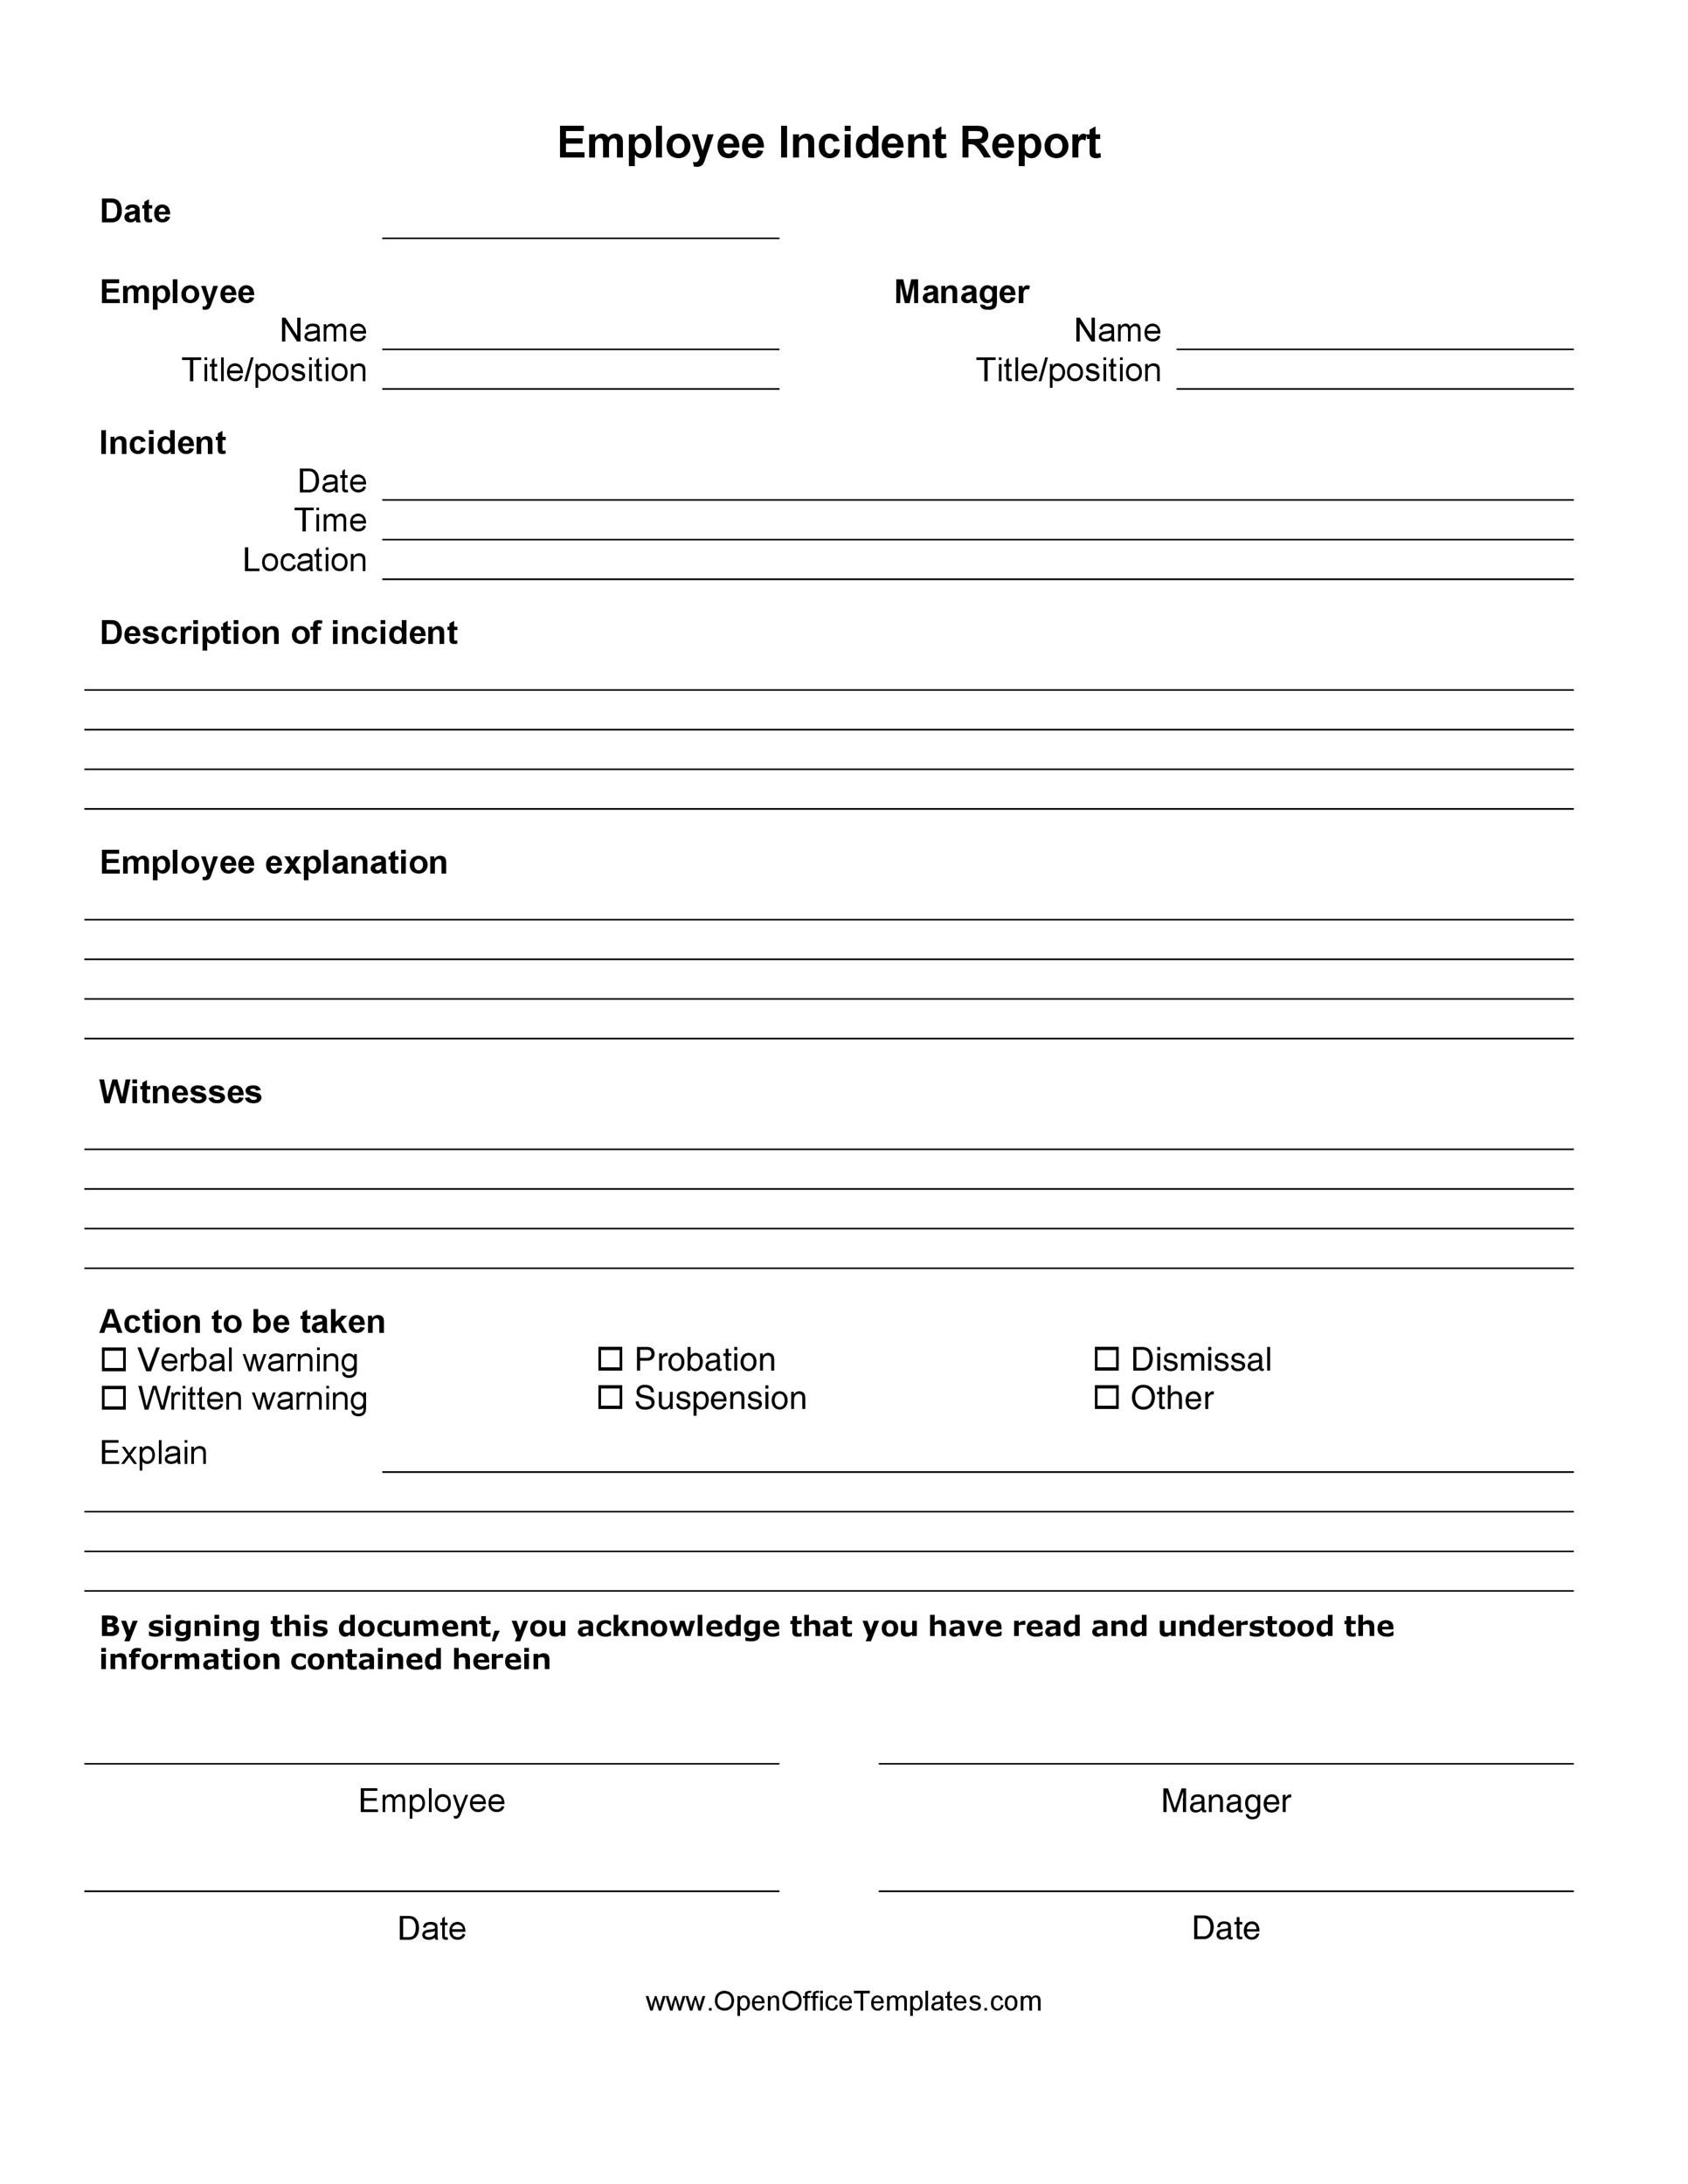 Free Employee Accident Report Template